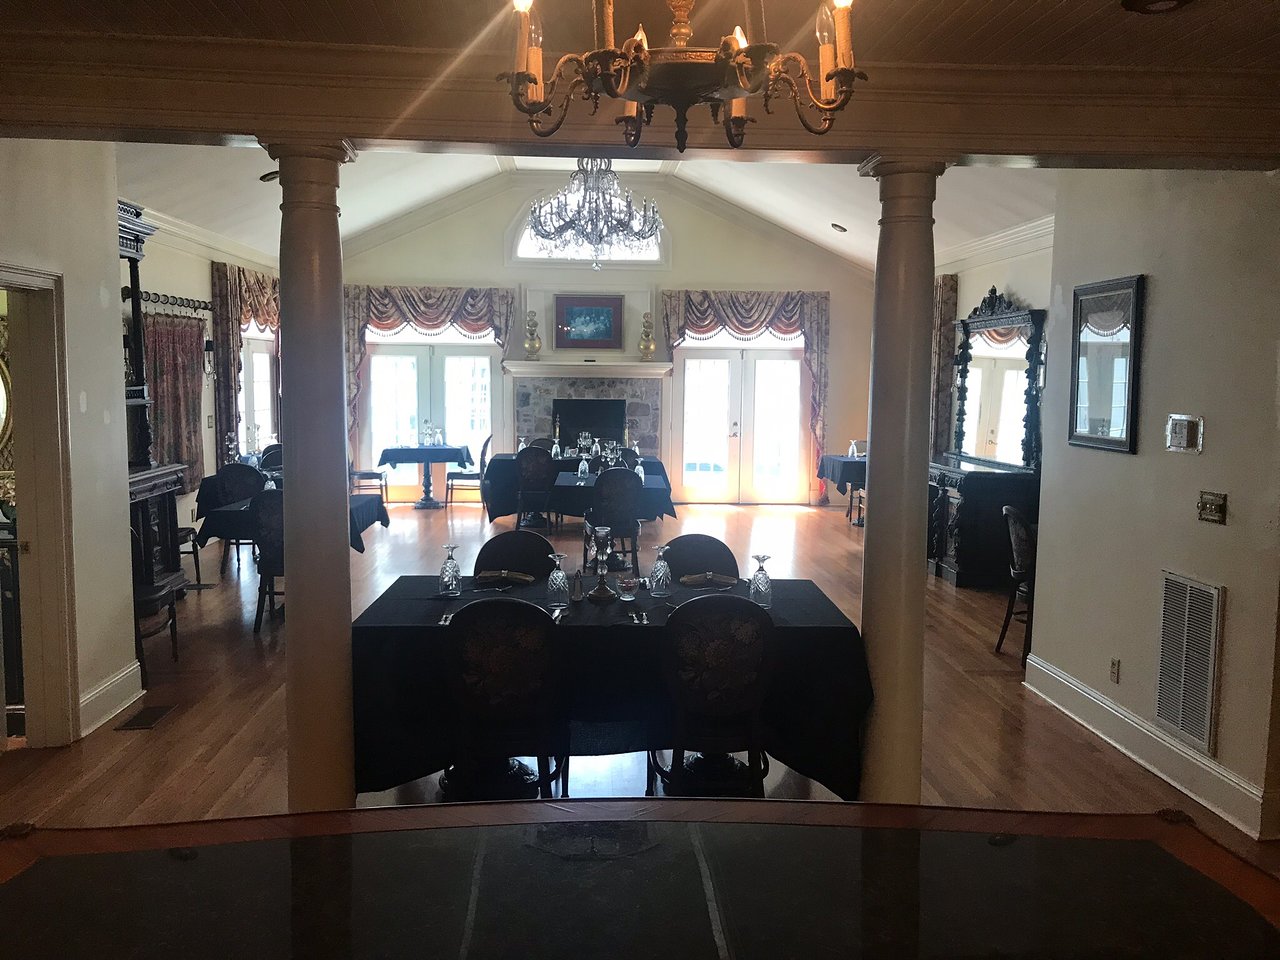 Fireplace Smells In the Summer Inspirational Oak Crest Mansion Inn Updated 2019 Prices & B&b Reviews